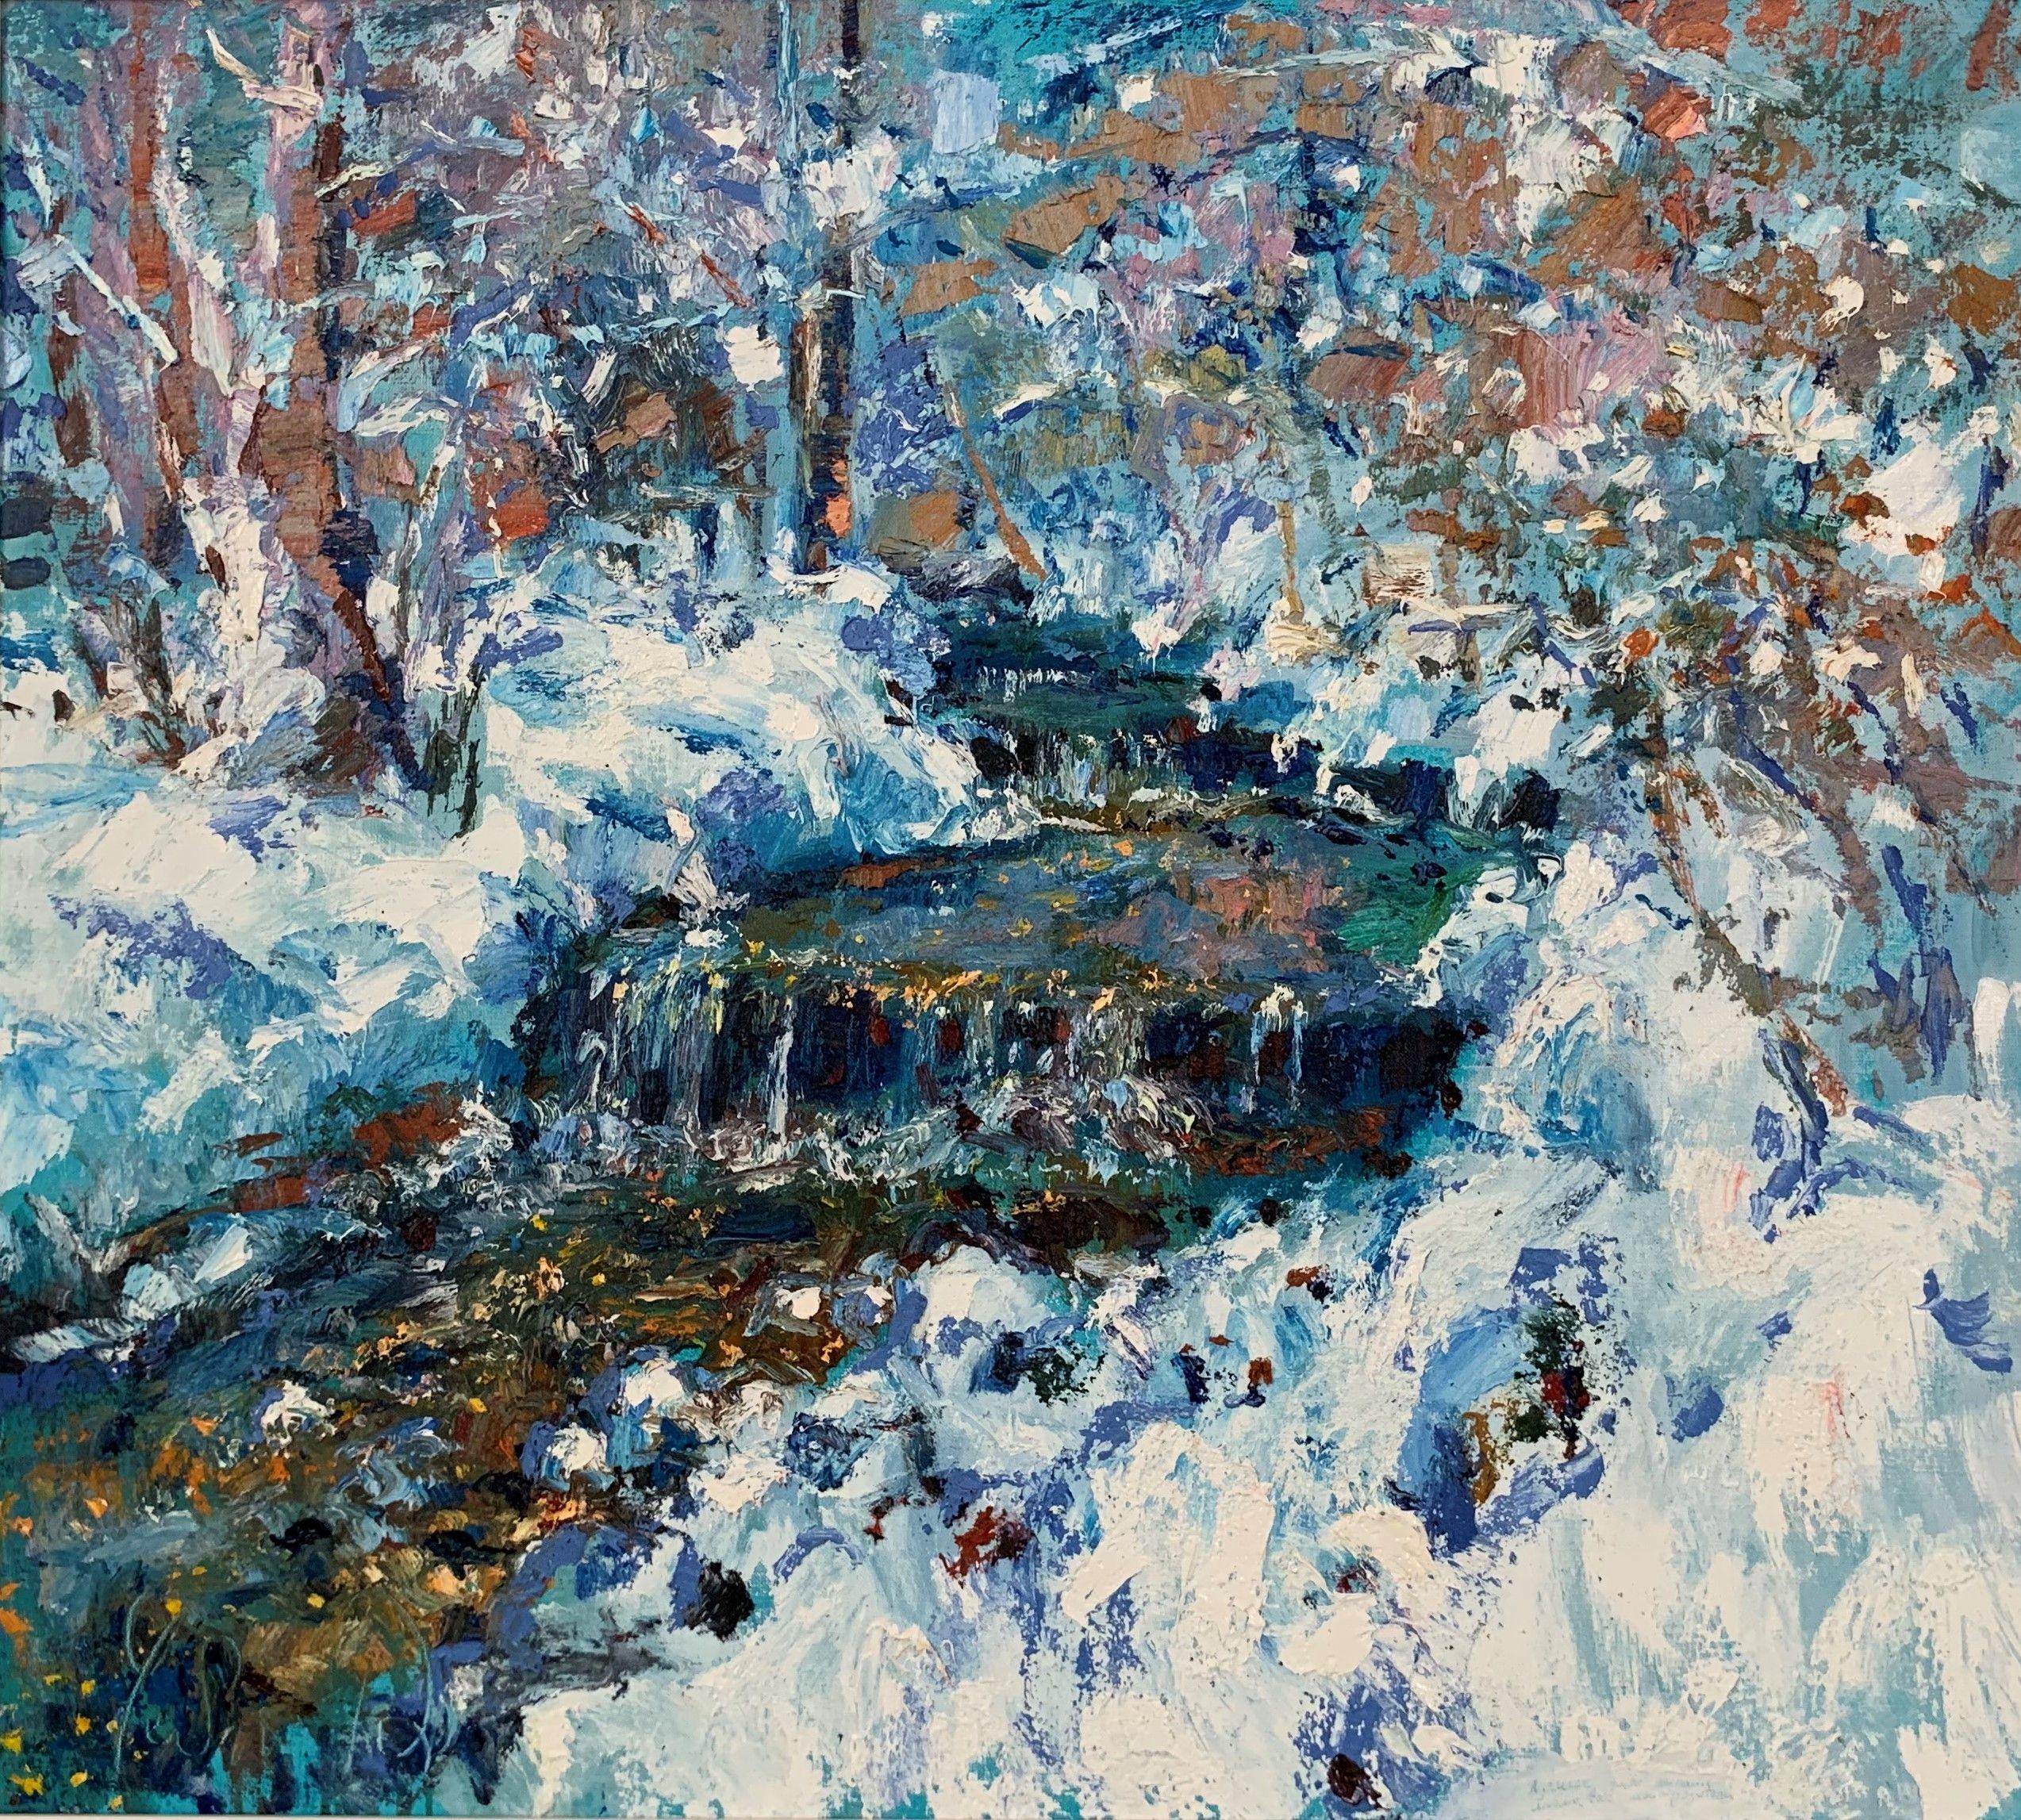 Andrey Chebotaru Landscape Painting - Frozen river, Painting, Oil on Canvas